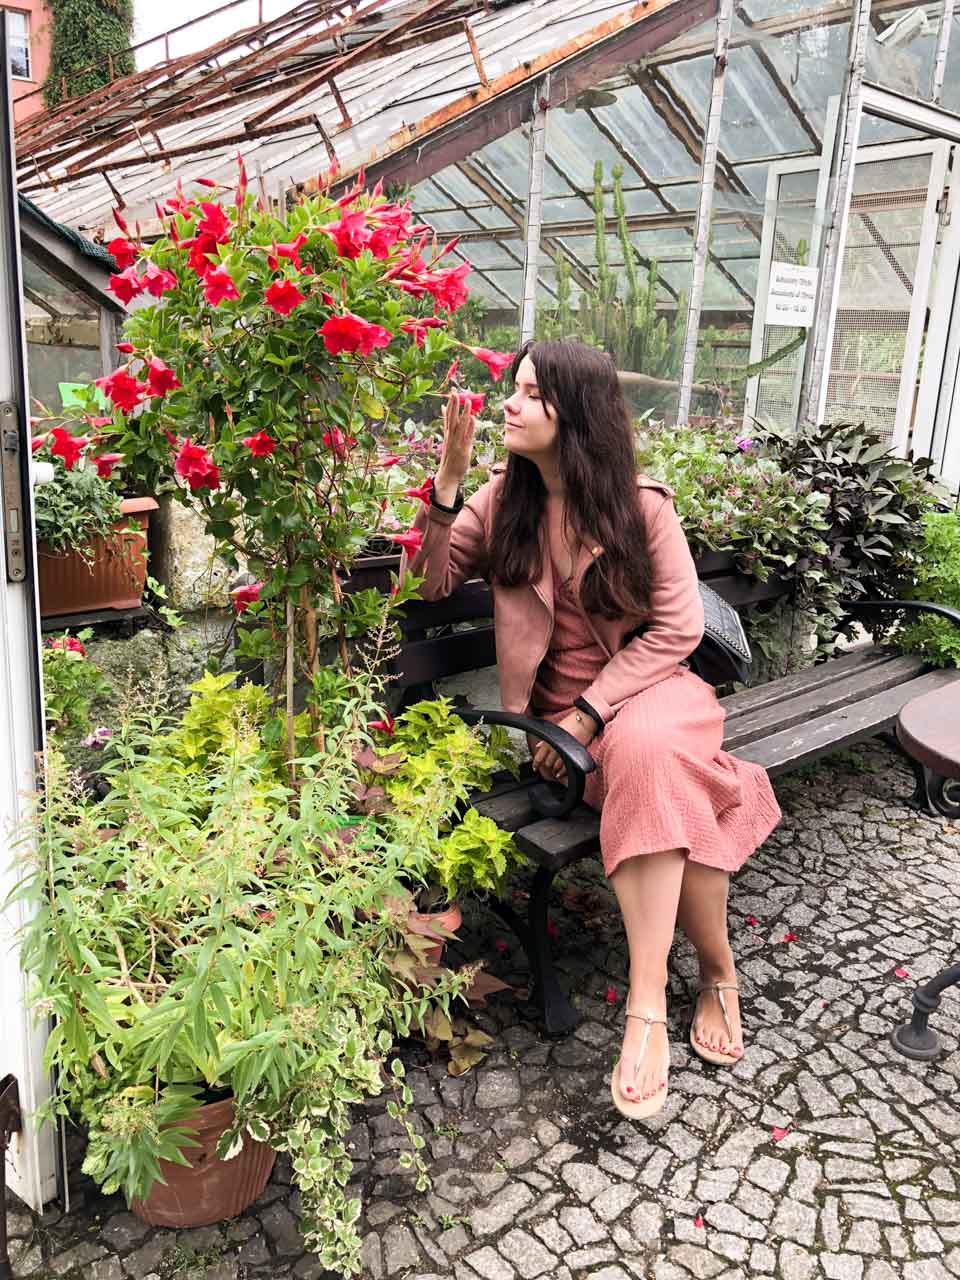 A woman in a pink dress sitting on a bench outside a greenhouse, smelling a red flower